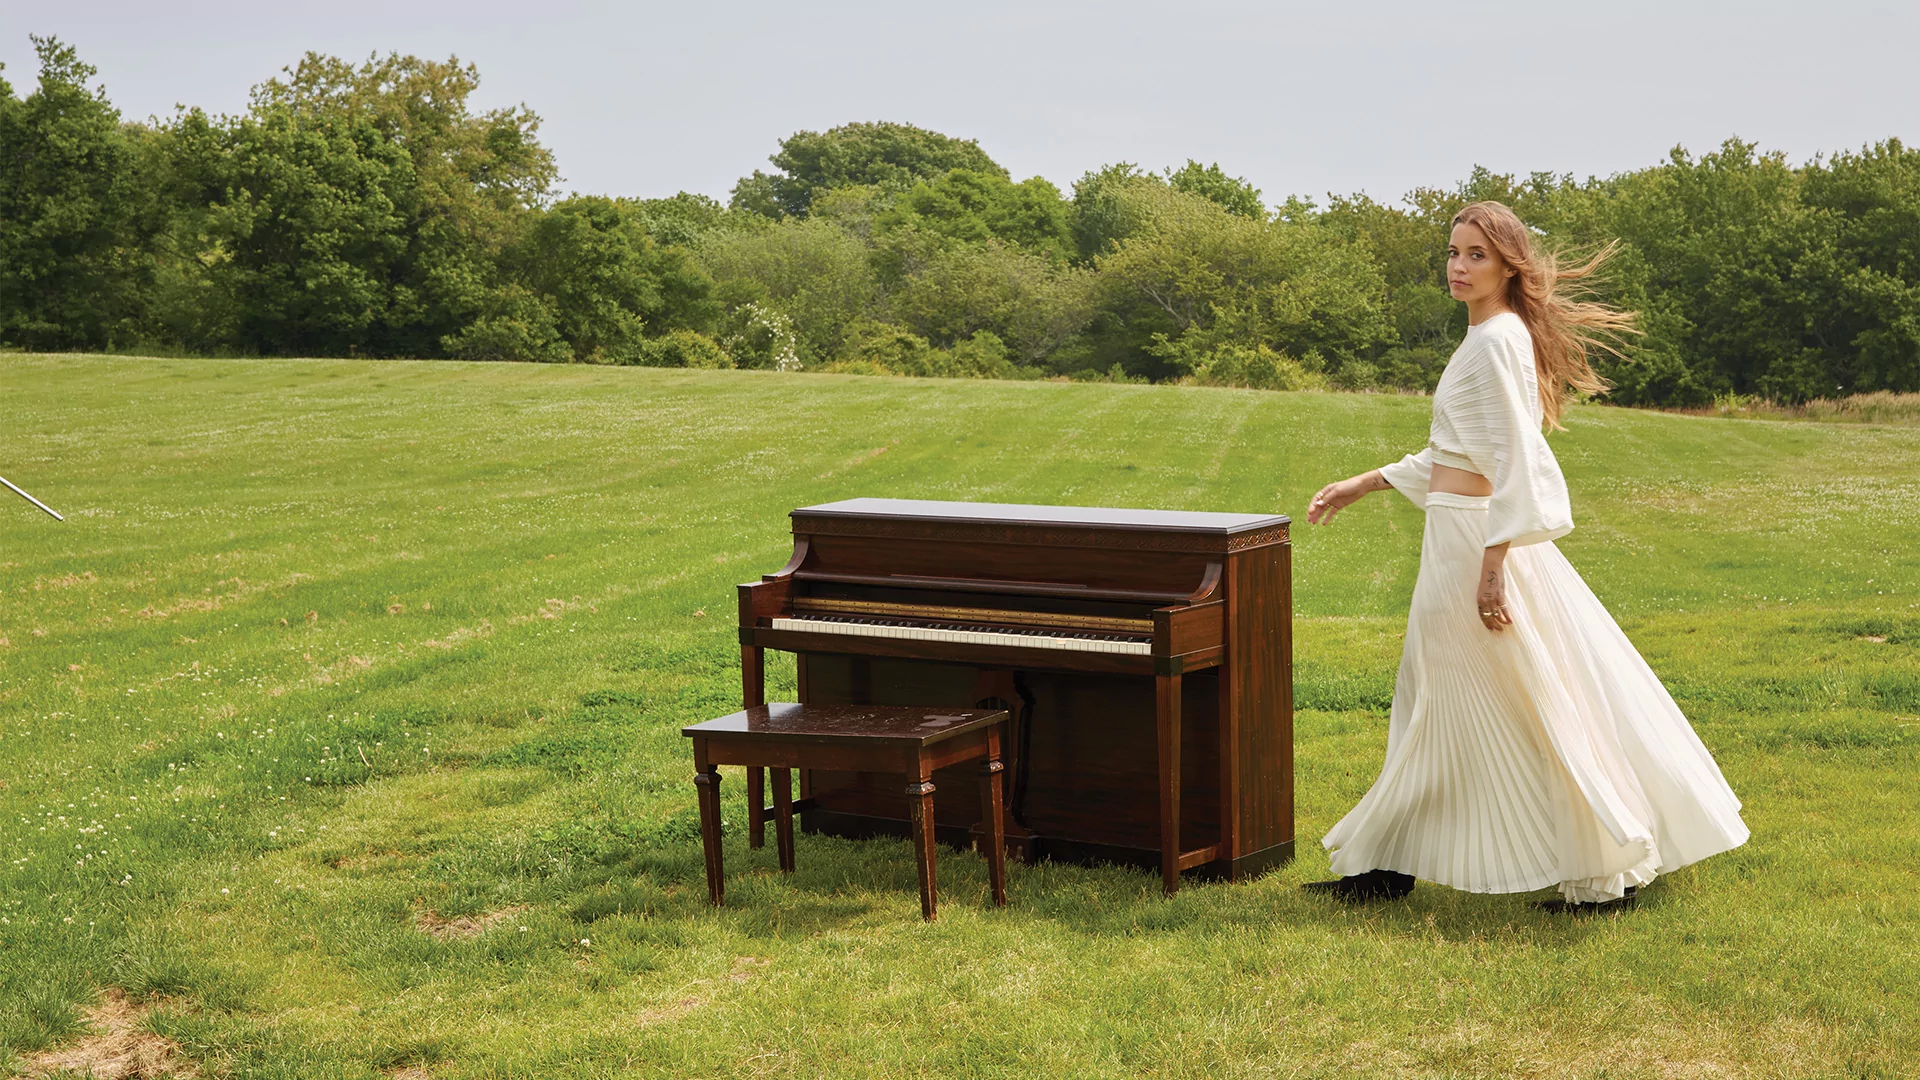 Photo of LP Giobbi posing next to a piano in a green field while wearing a flowing white dress